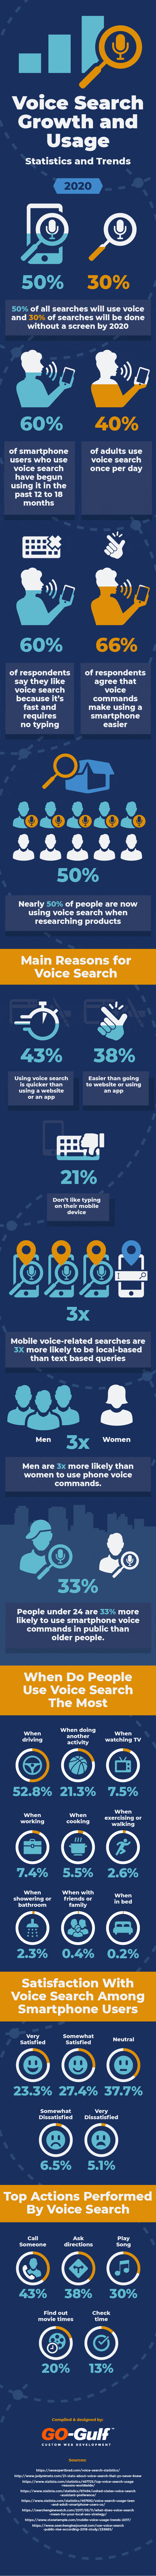 Voice Search Growth and Usage - Statistics and Trends - #infographic